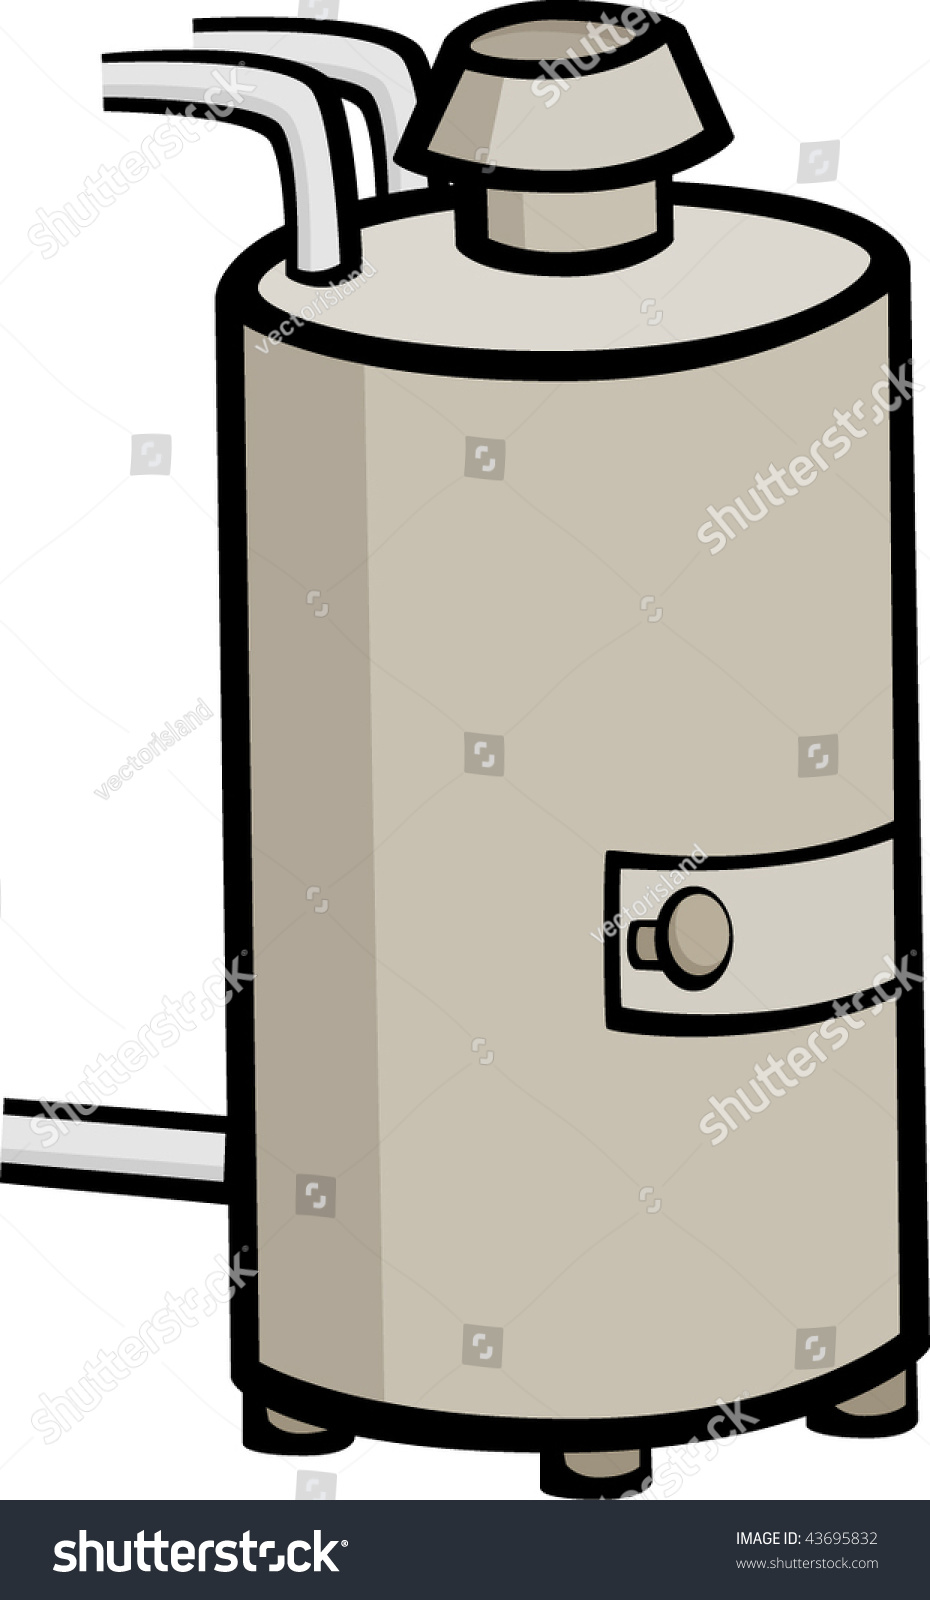 Water Heater Stock Vector Royalty Free 43695832